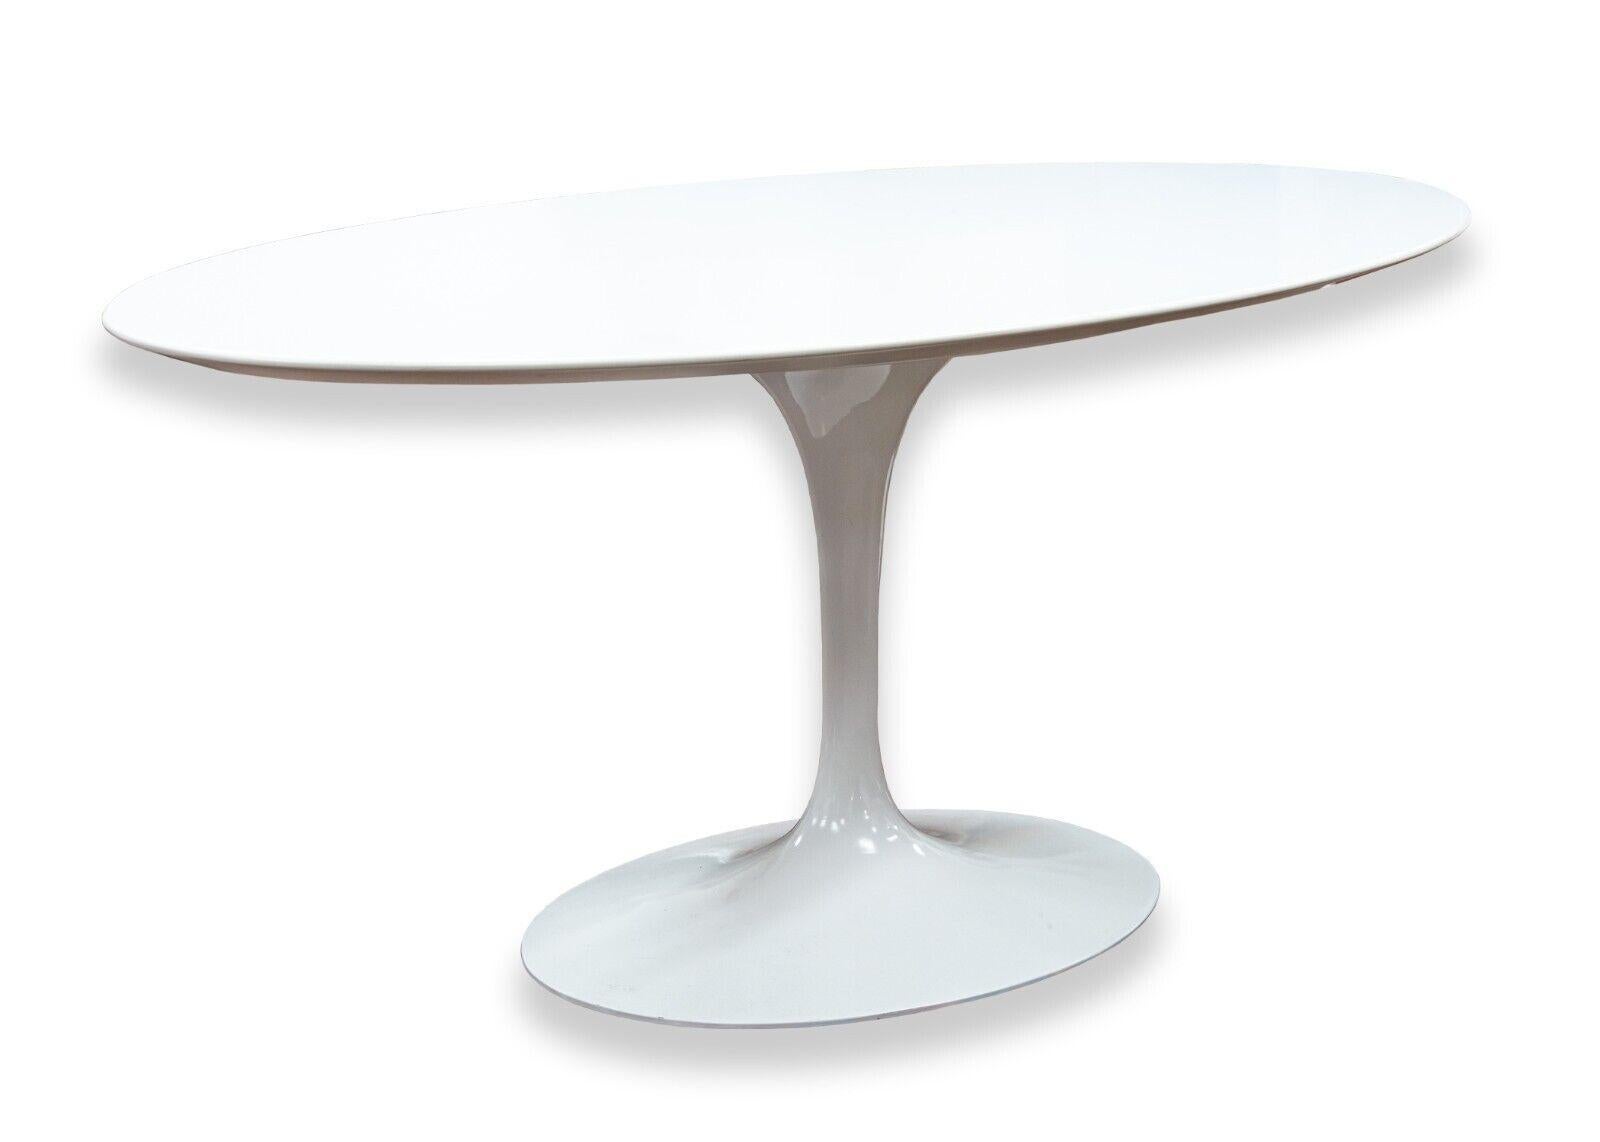 A Knoll Saarinen white oval tulip dining table. As a staple of mid century modern design, Eero Saarinen's tulip table will never go out of style. This piece, manufactured by Knoll, features a super chic and modern tulip base made out of a cast